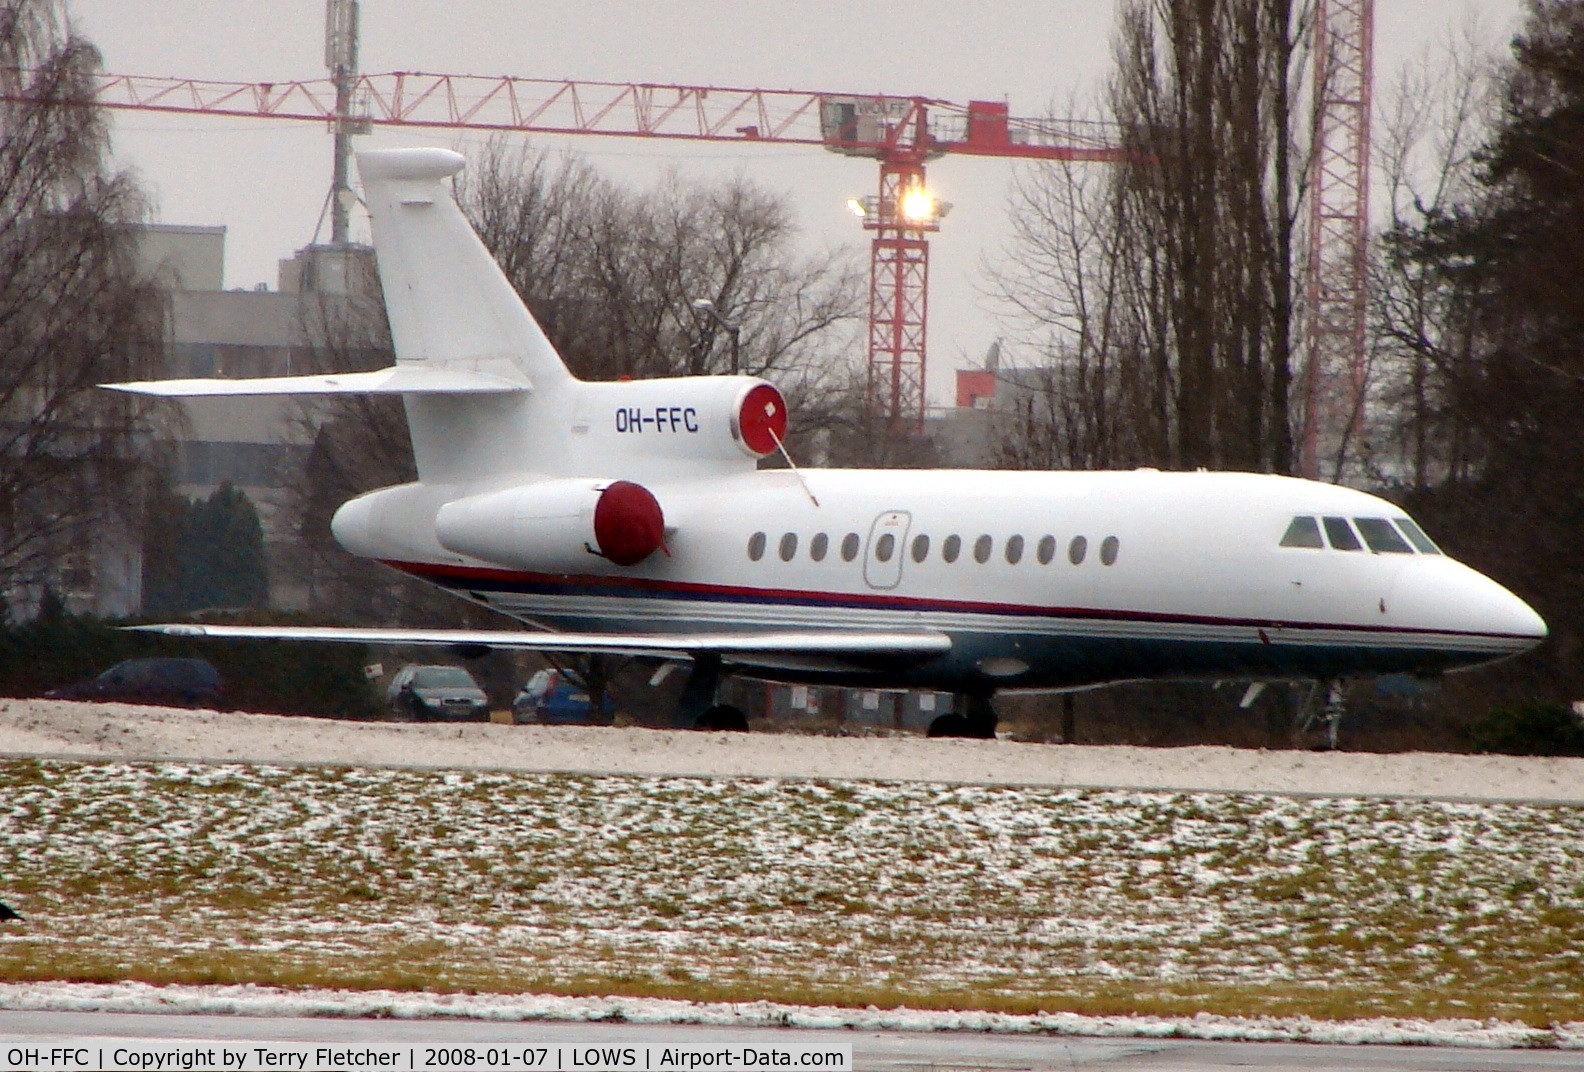 OH-FFC, 1998 Dassault Falcon 900EX C/N 23, Finniish Falcon 900EX at Salzburg - maybe in connection with the Ski-jumping further down the valley